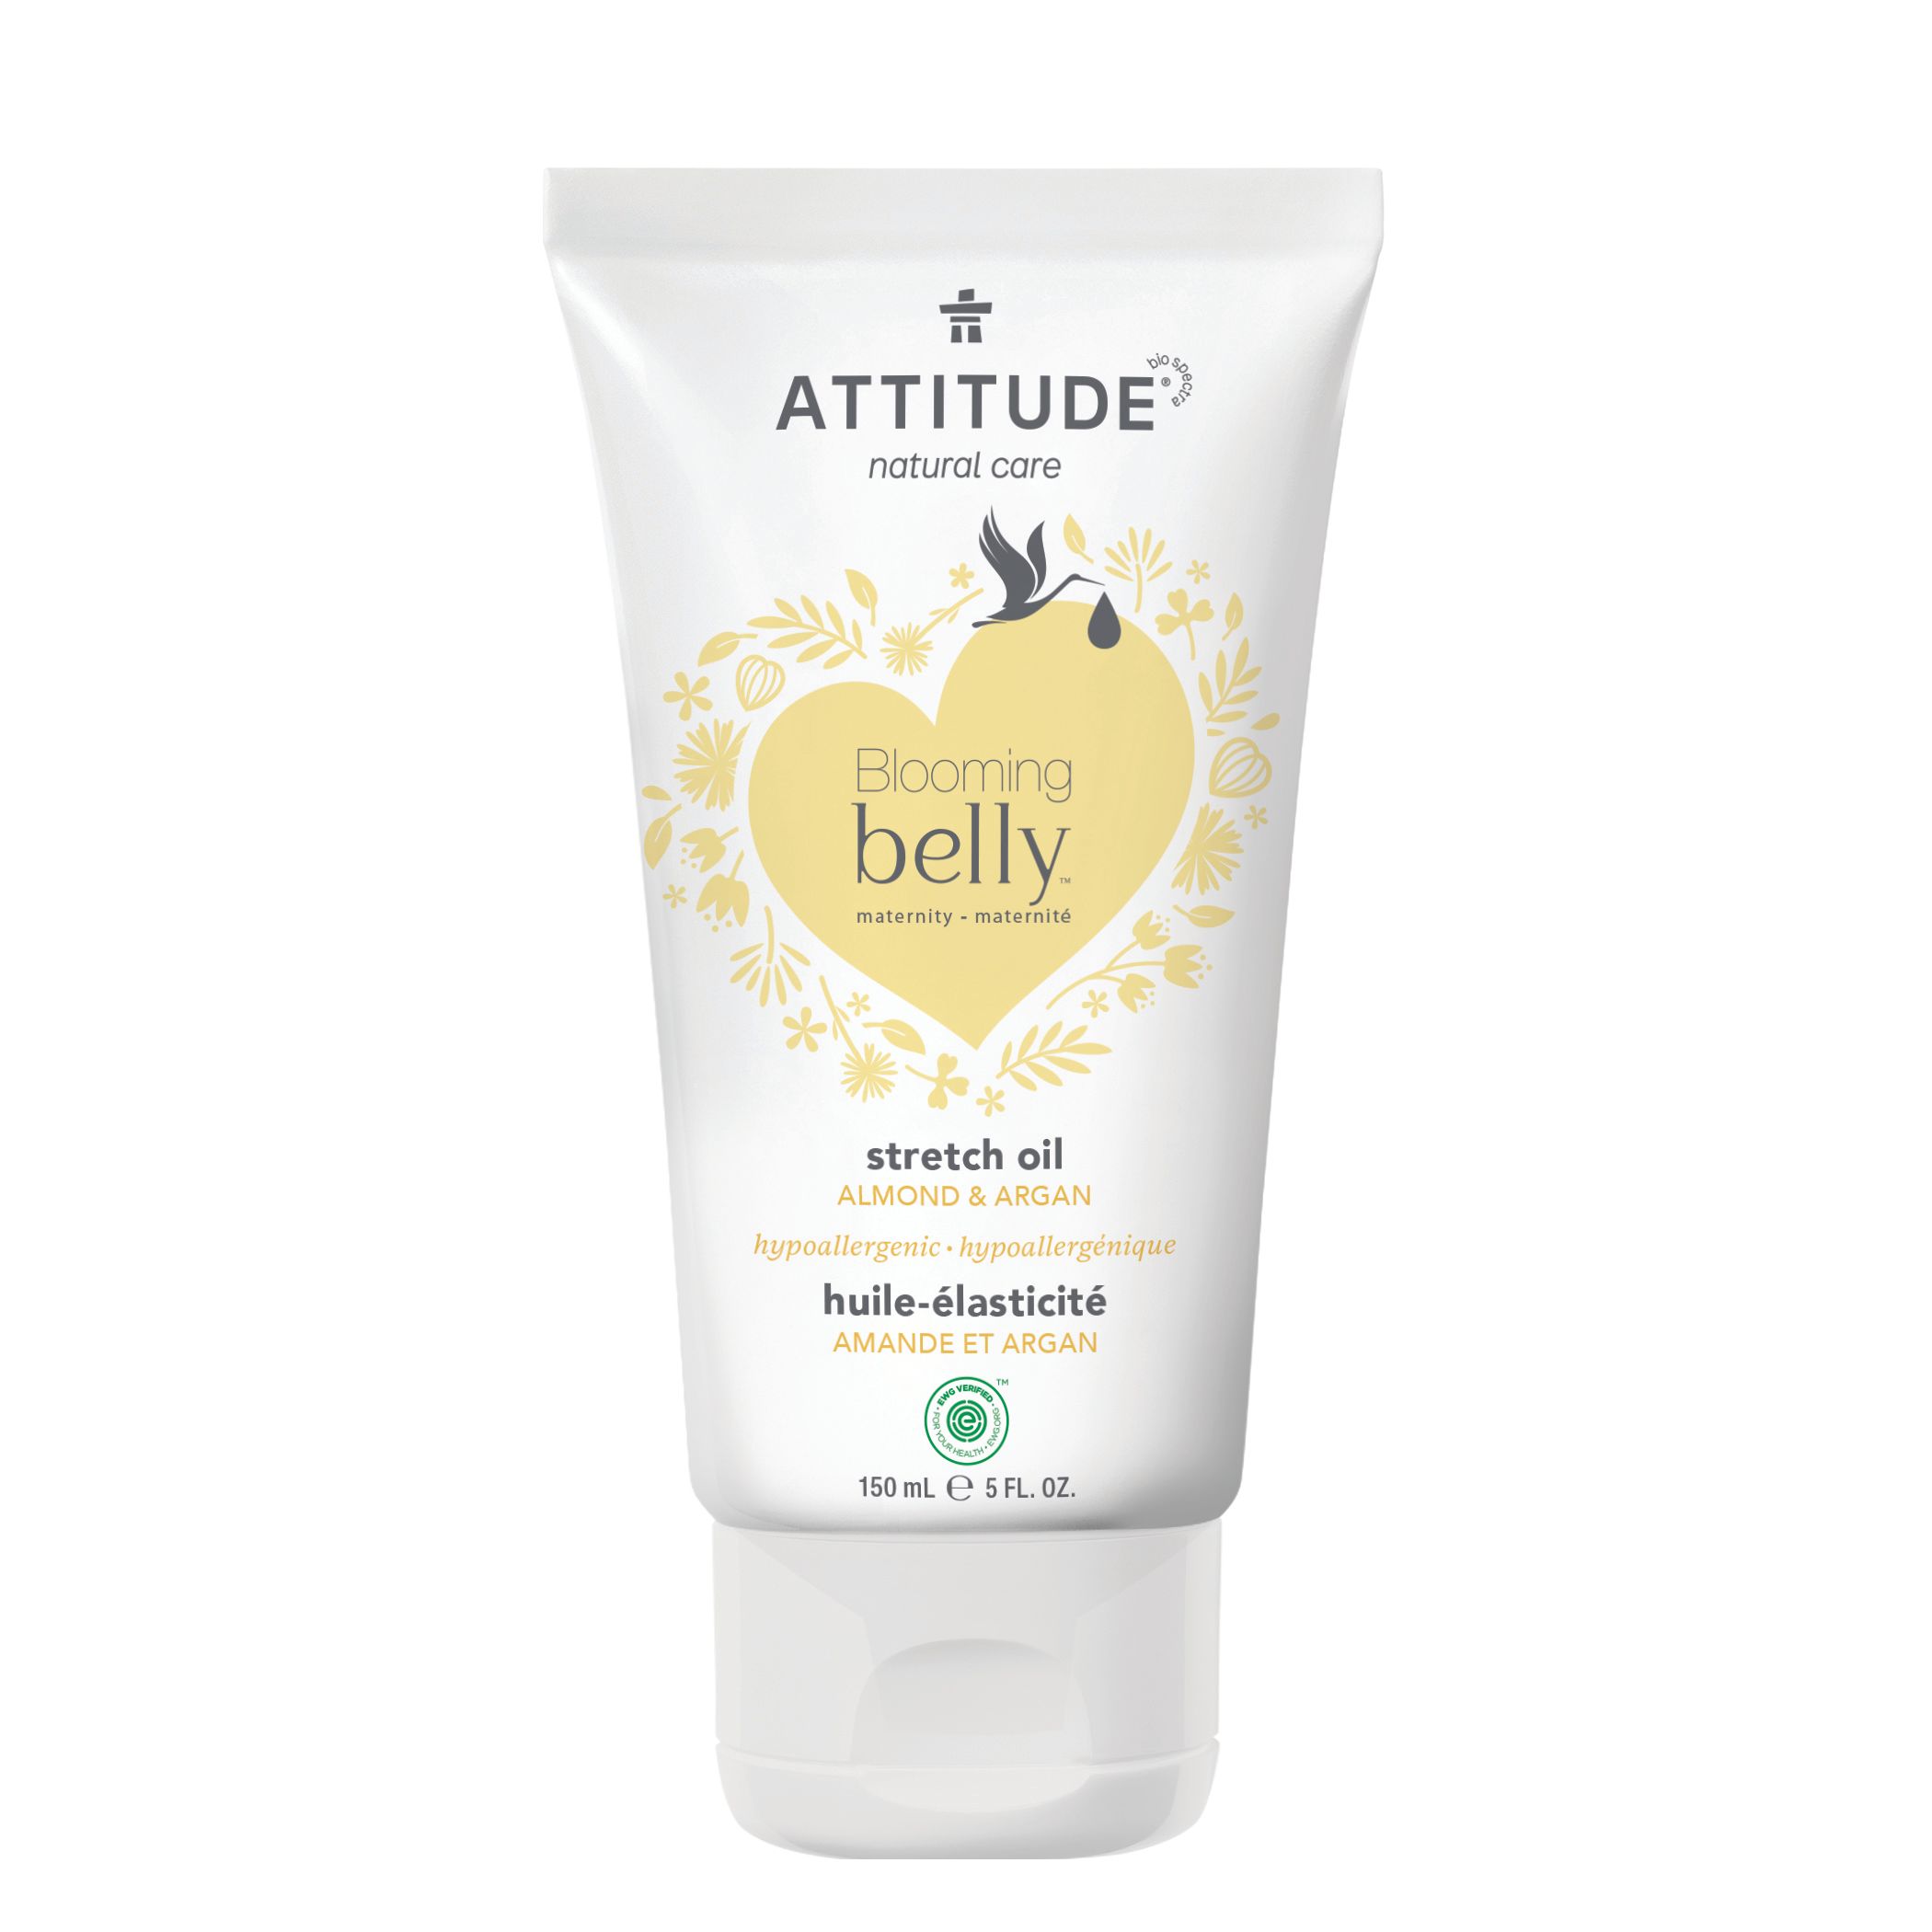 ATTITUDE Blooming Belly Stretch Oil, Almond & Argan